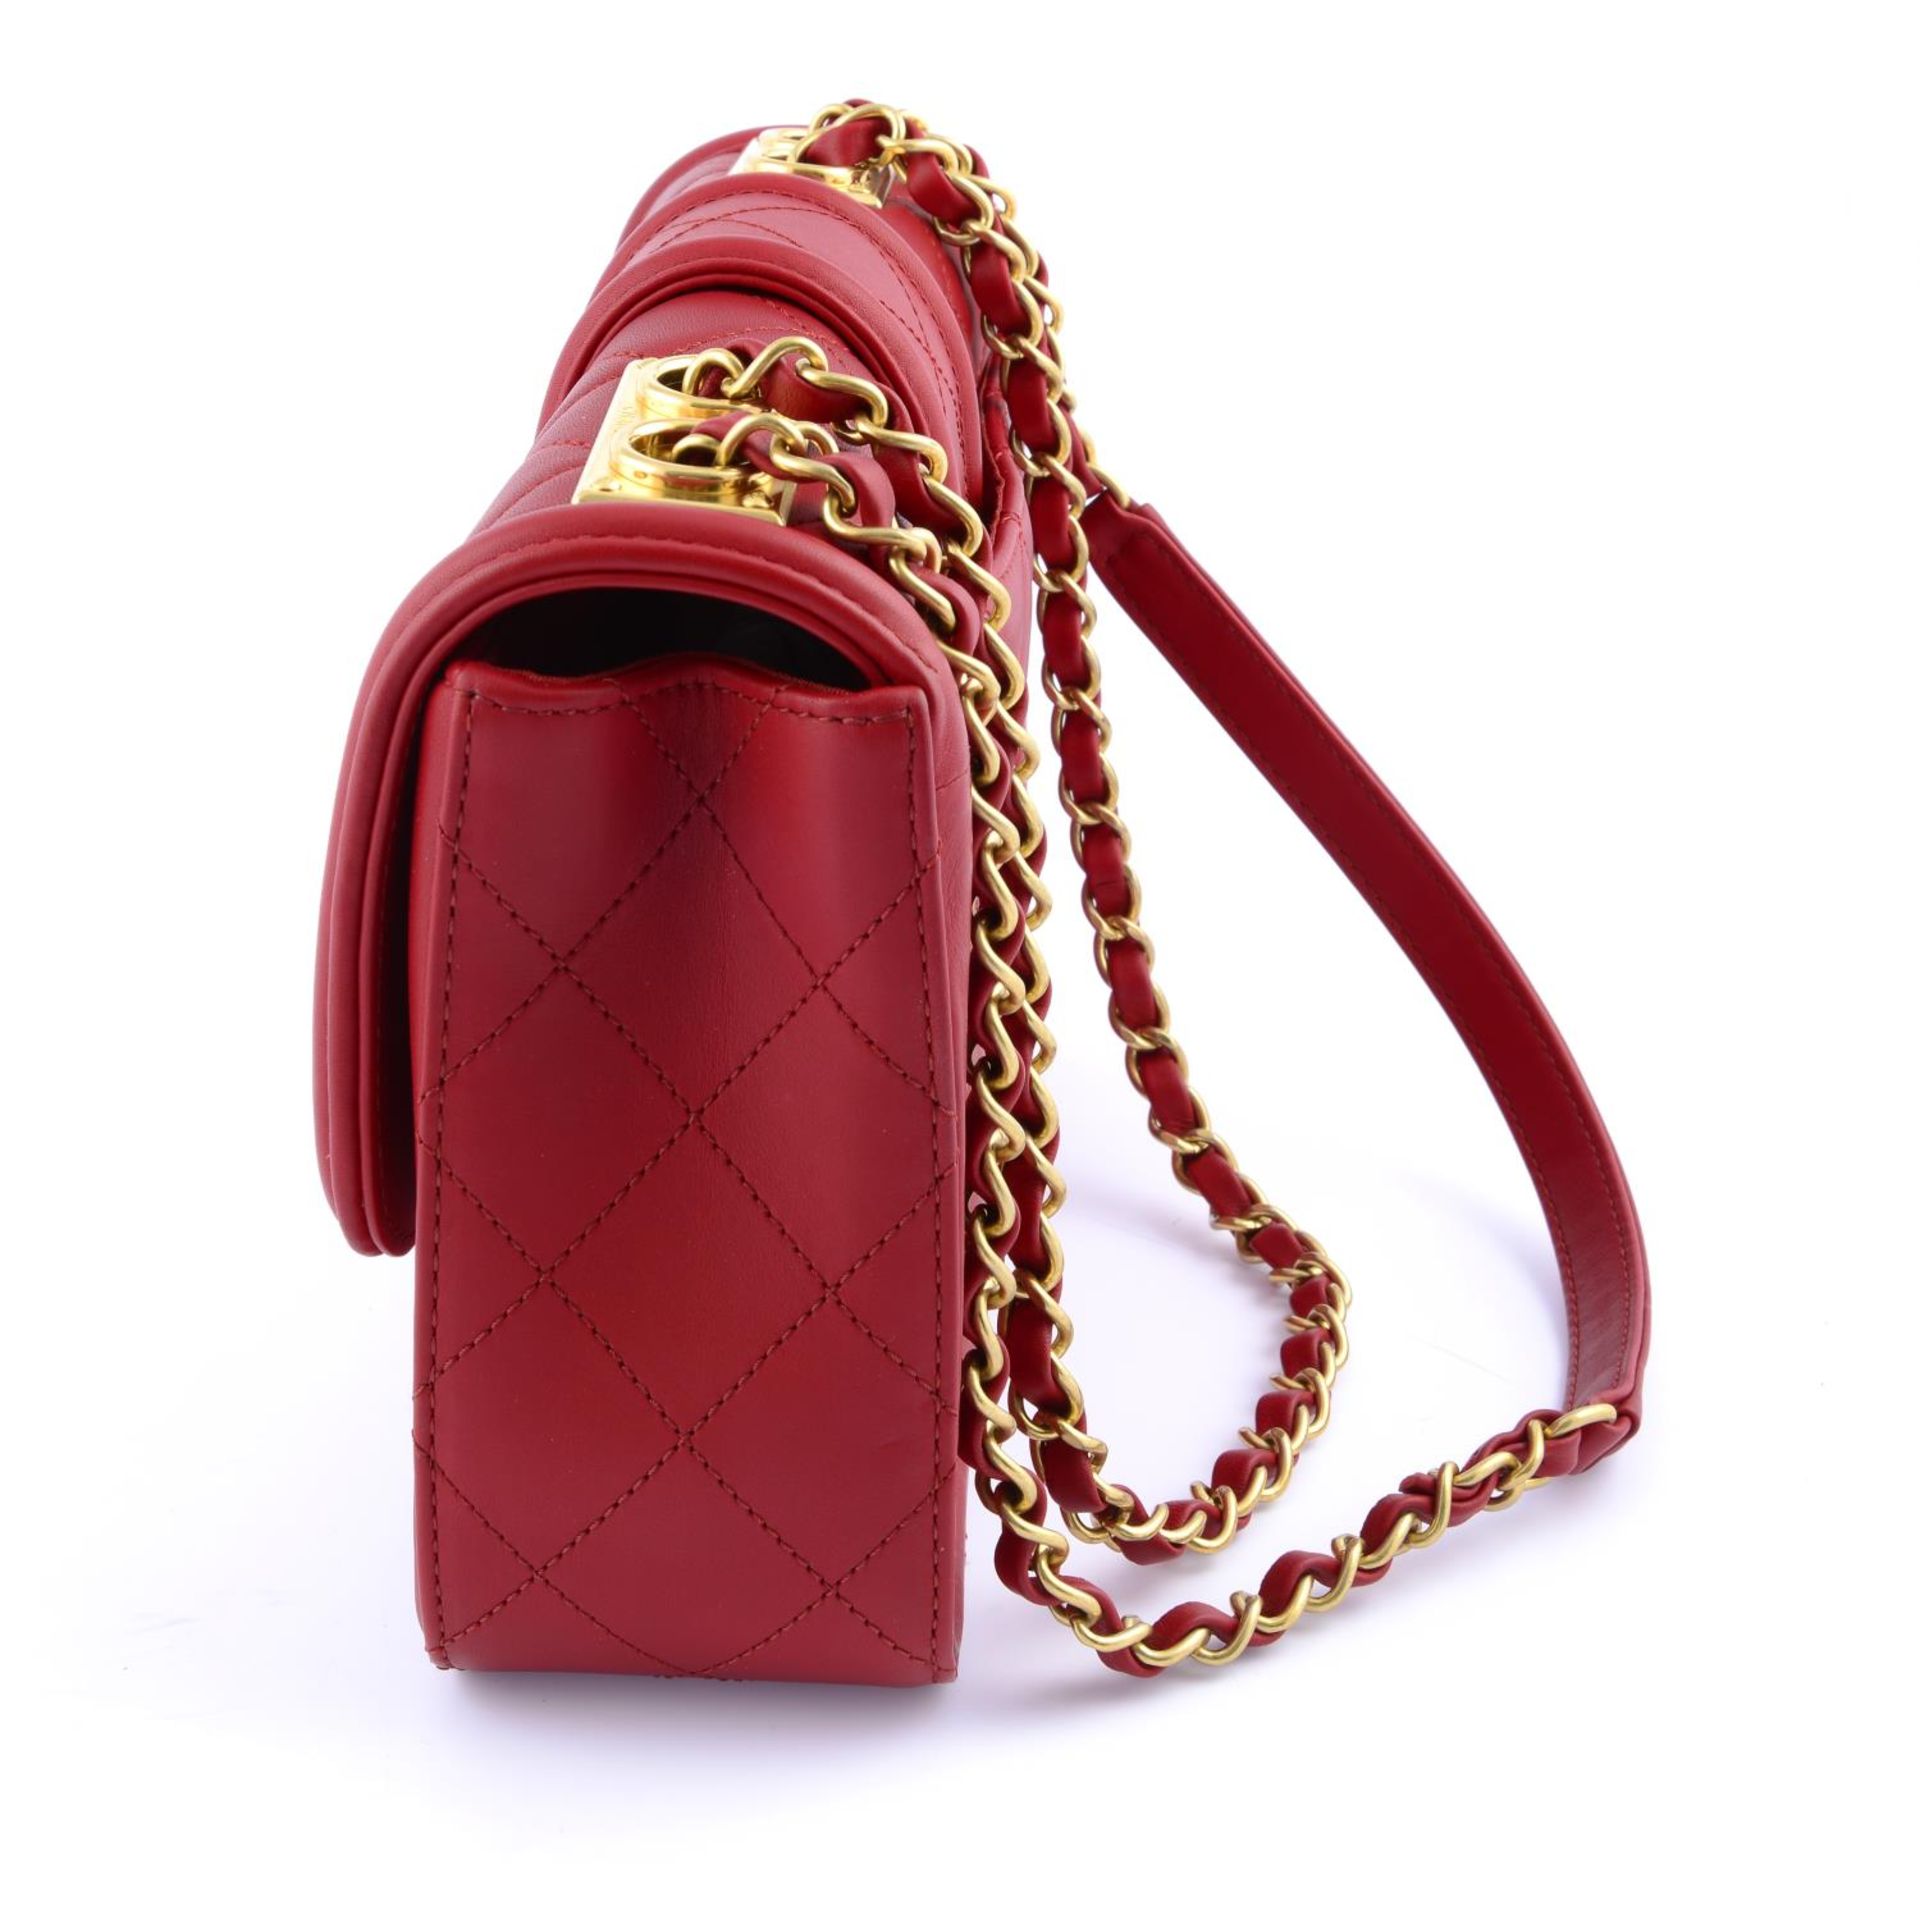 CHANEL - a red quilted Elegant handbag. - Image 3 of 4